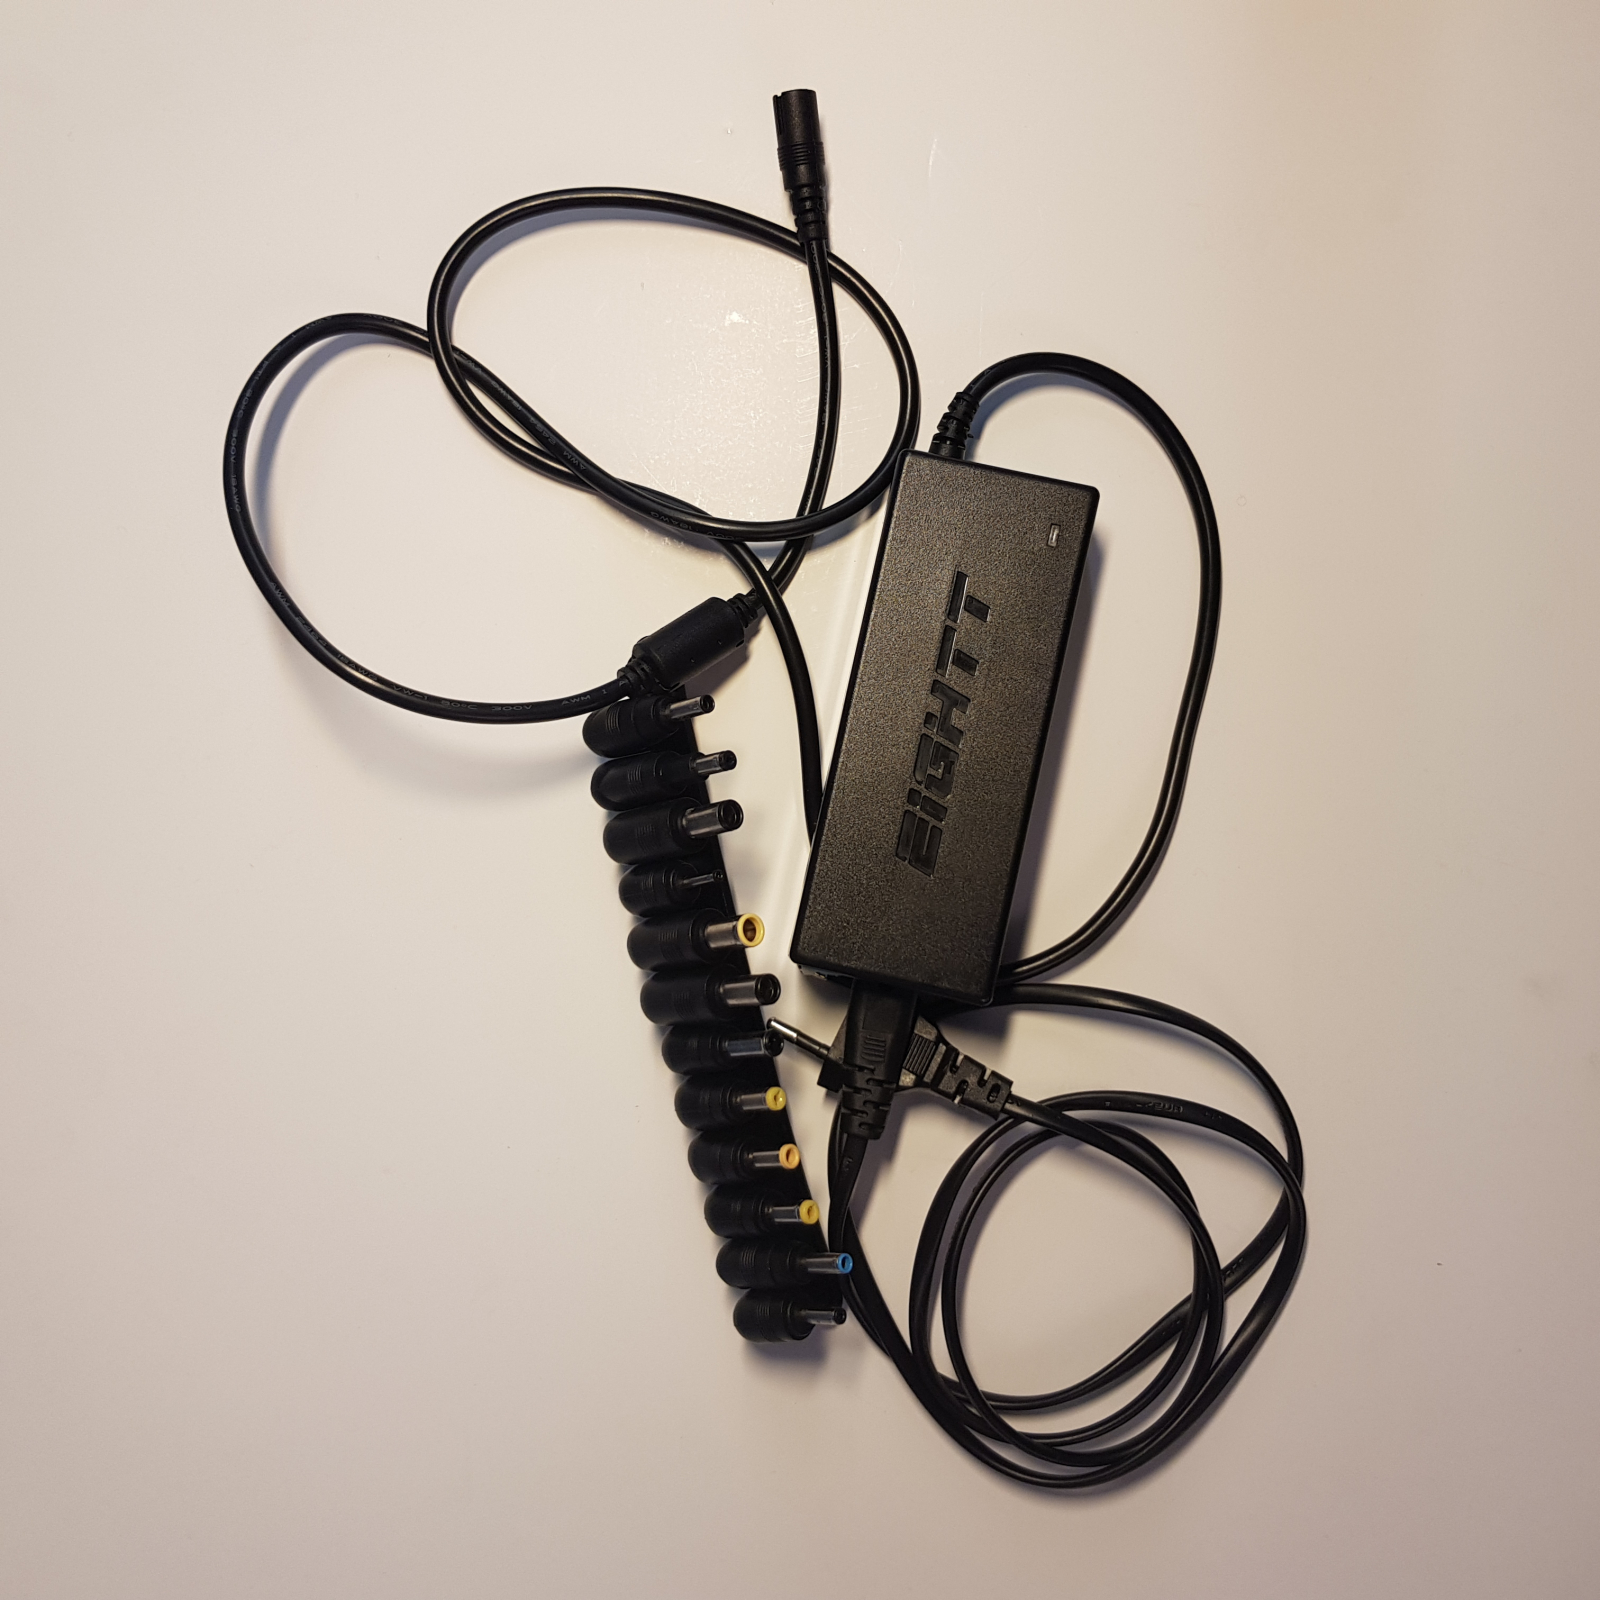 Universal laptop charger